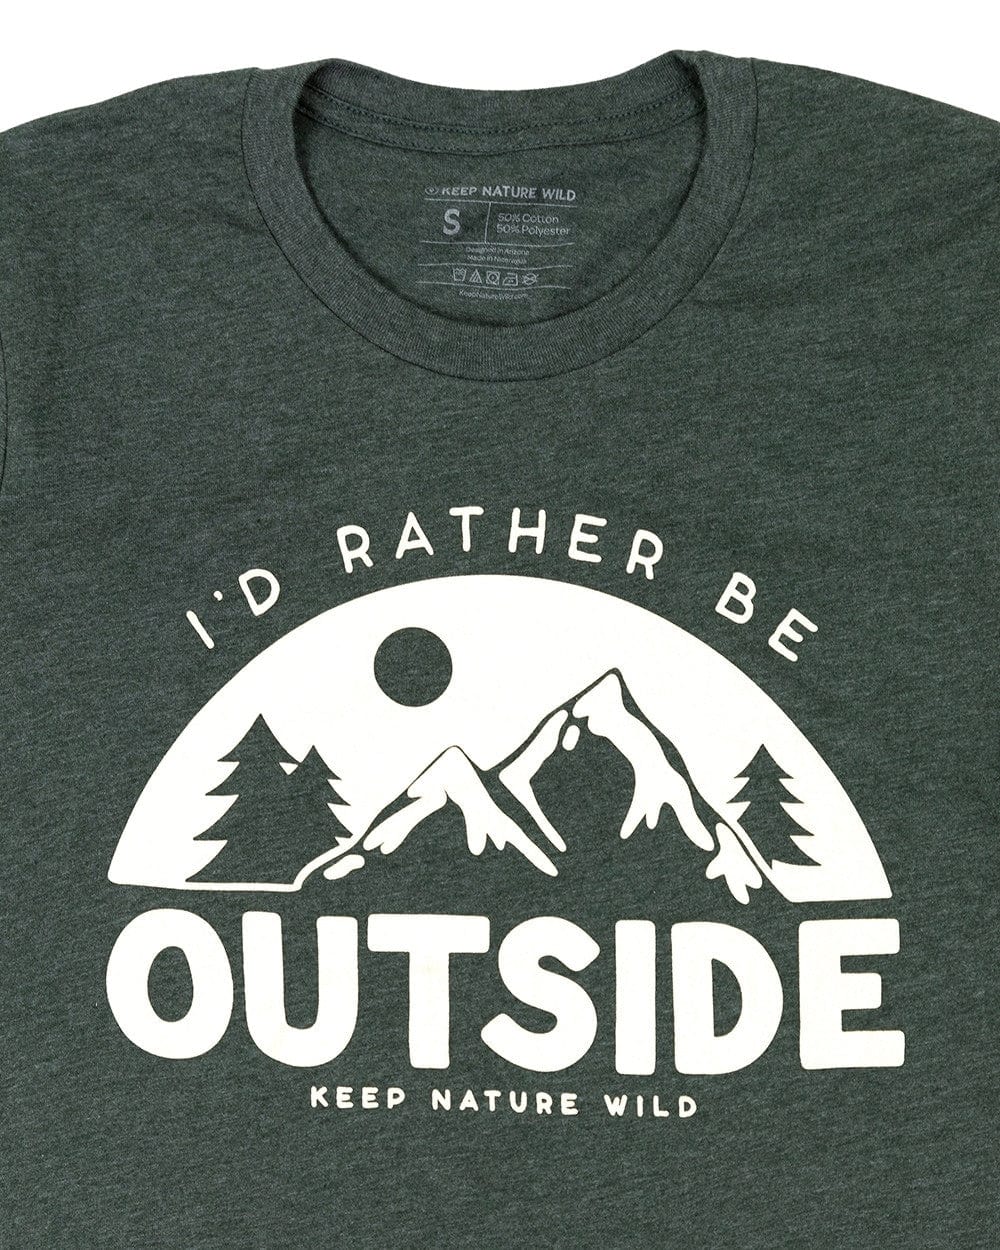 Adventure Mountain Themed T Shirt, Hiking Tees, Outdoor Shirts, Wilderness  Graphic Tee, Cool Outdoors Print, Forest Print, Men , Women -  Canada